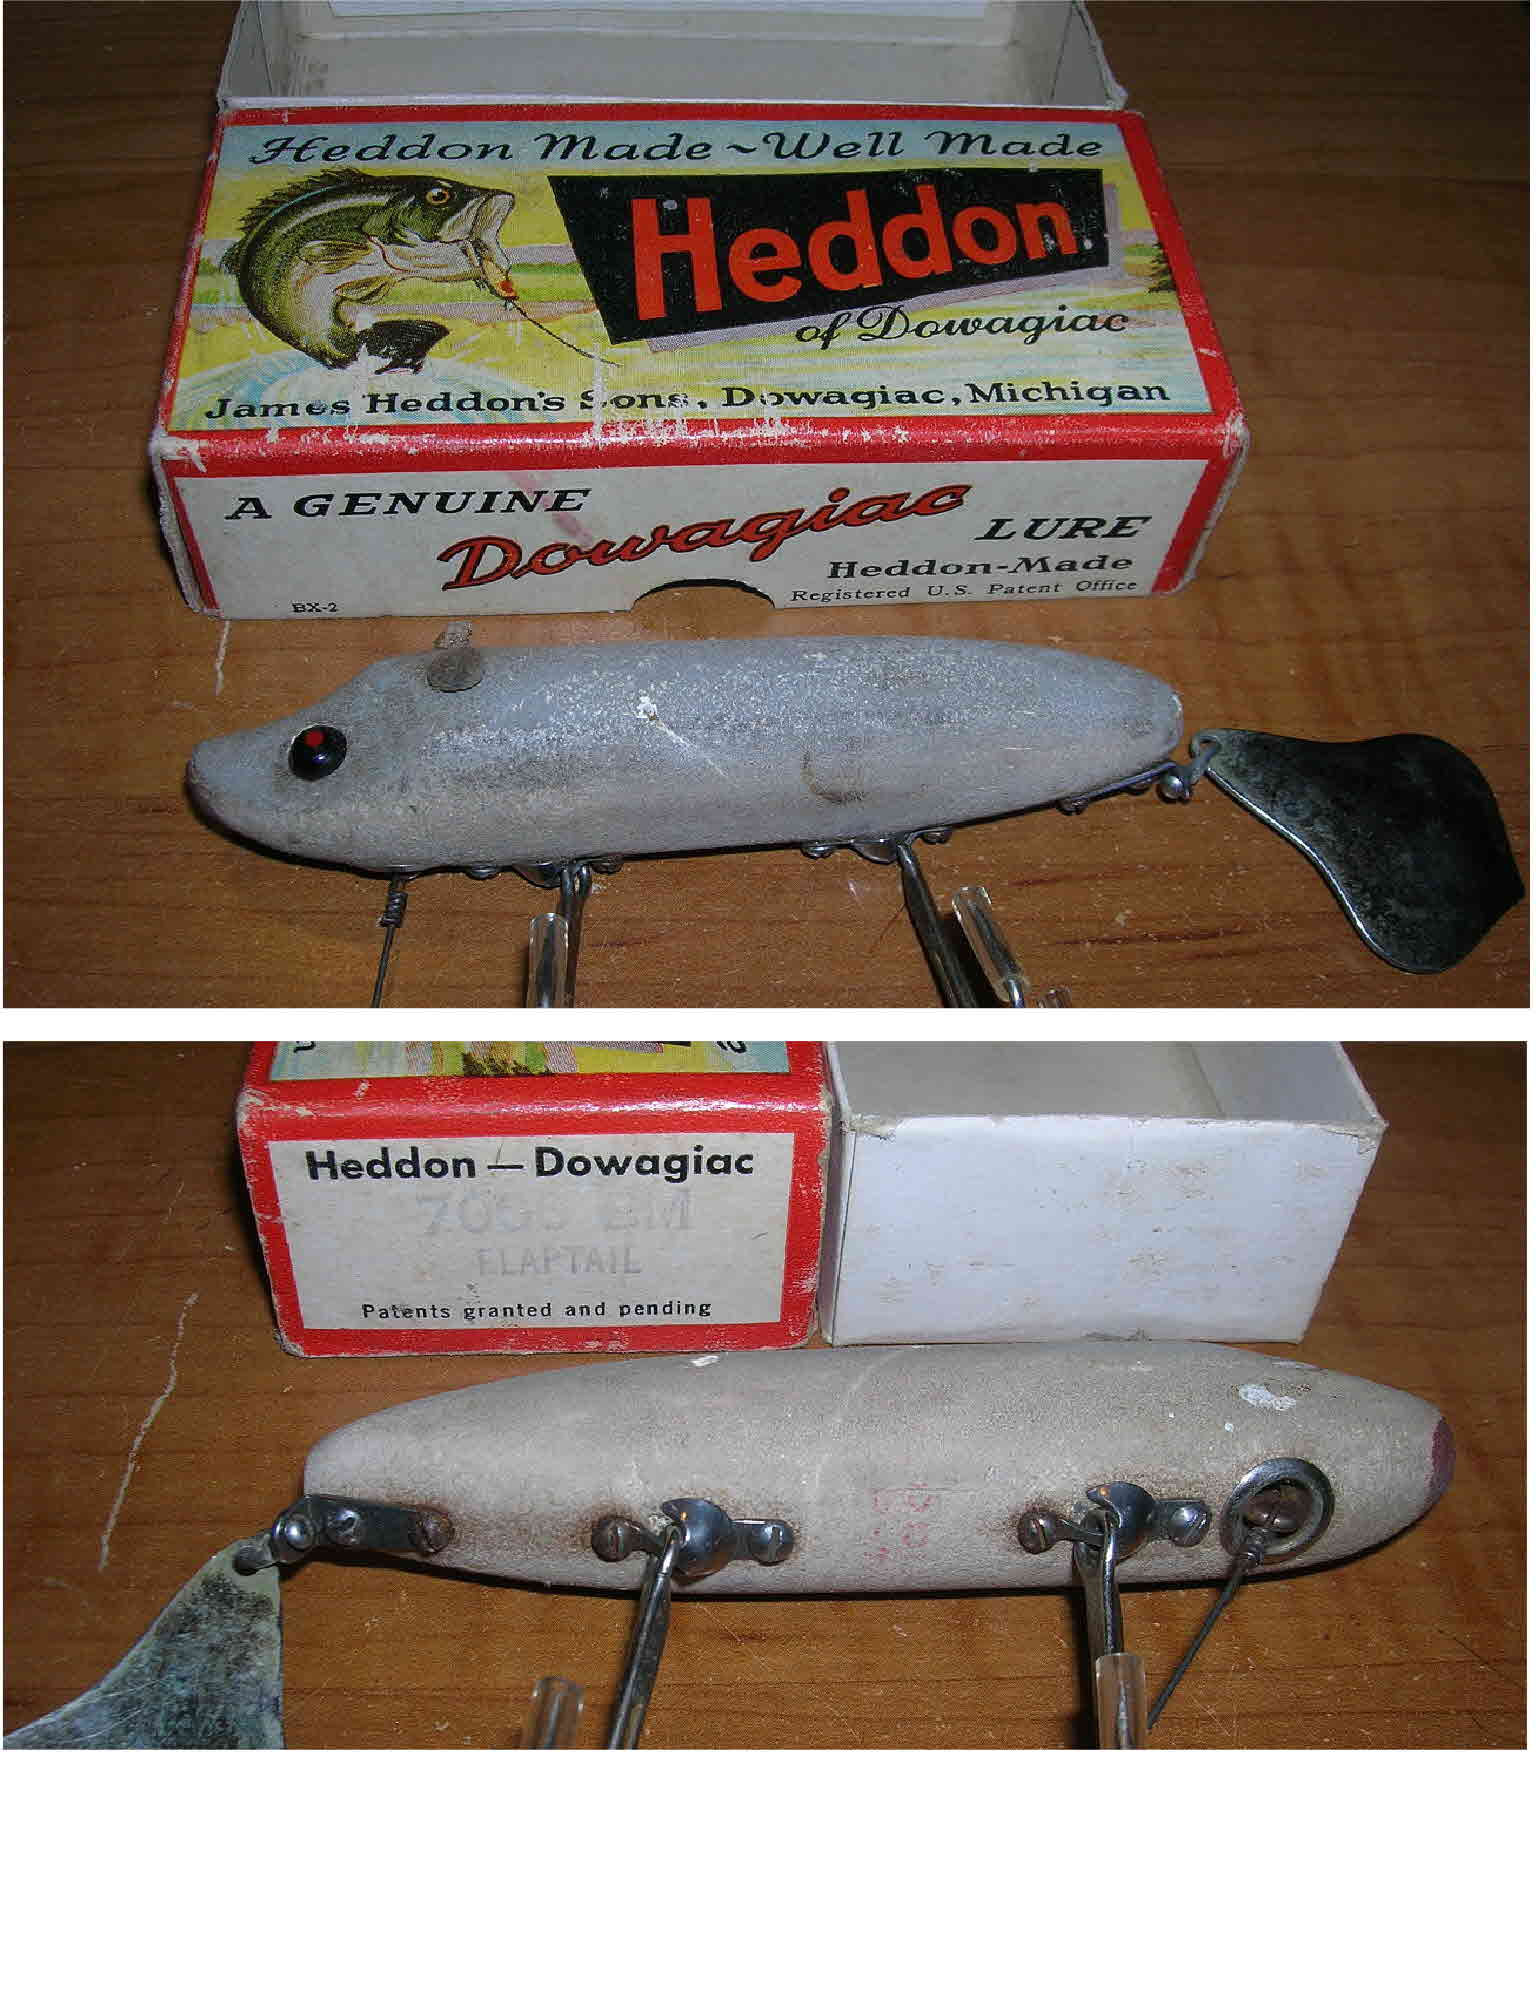 Florida Antique Tackle Collectors - Lure of the Week: Heddon 150